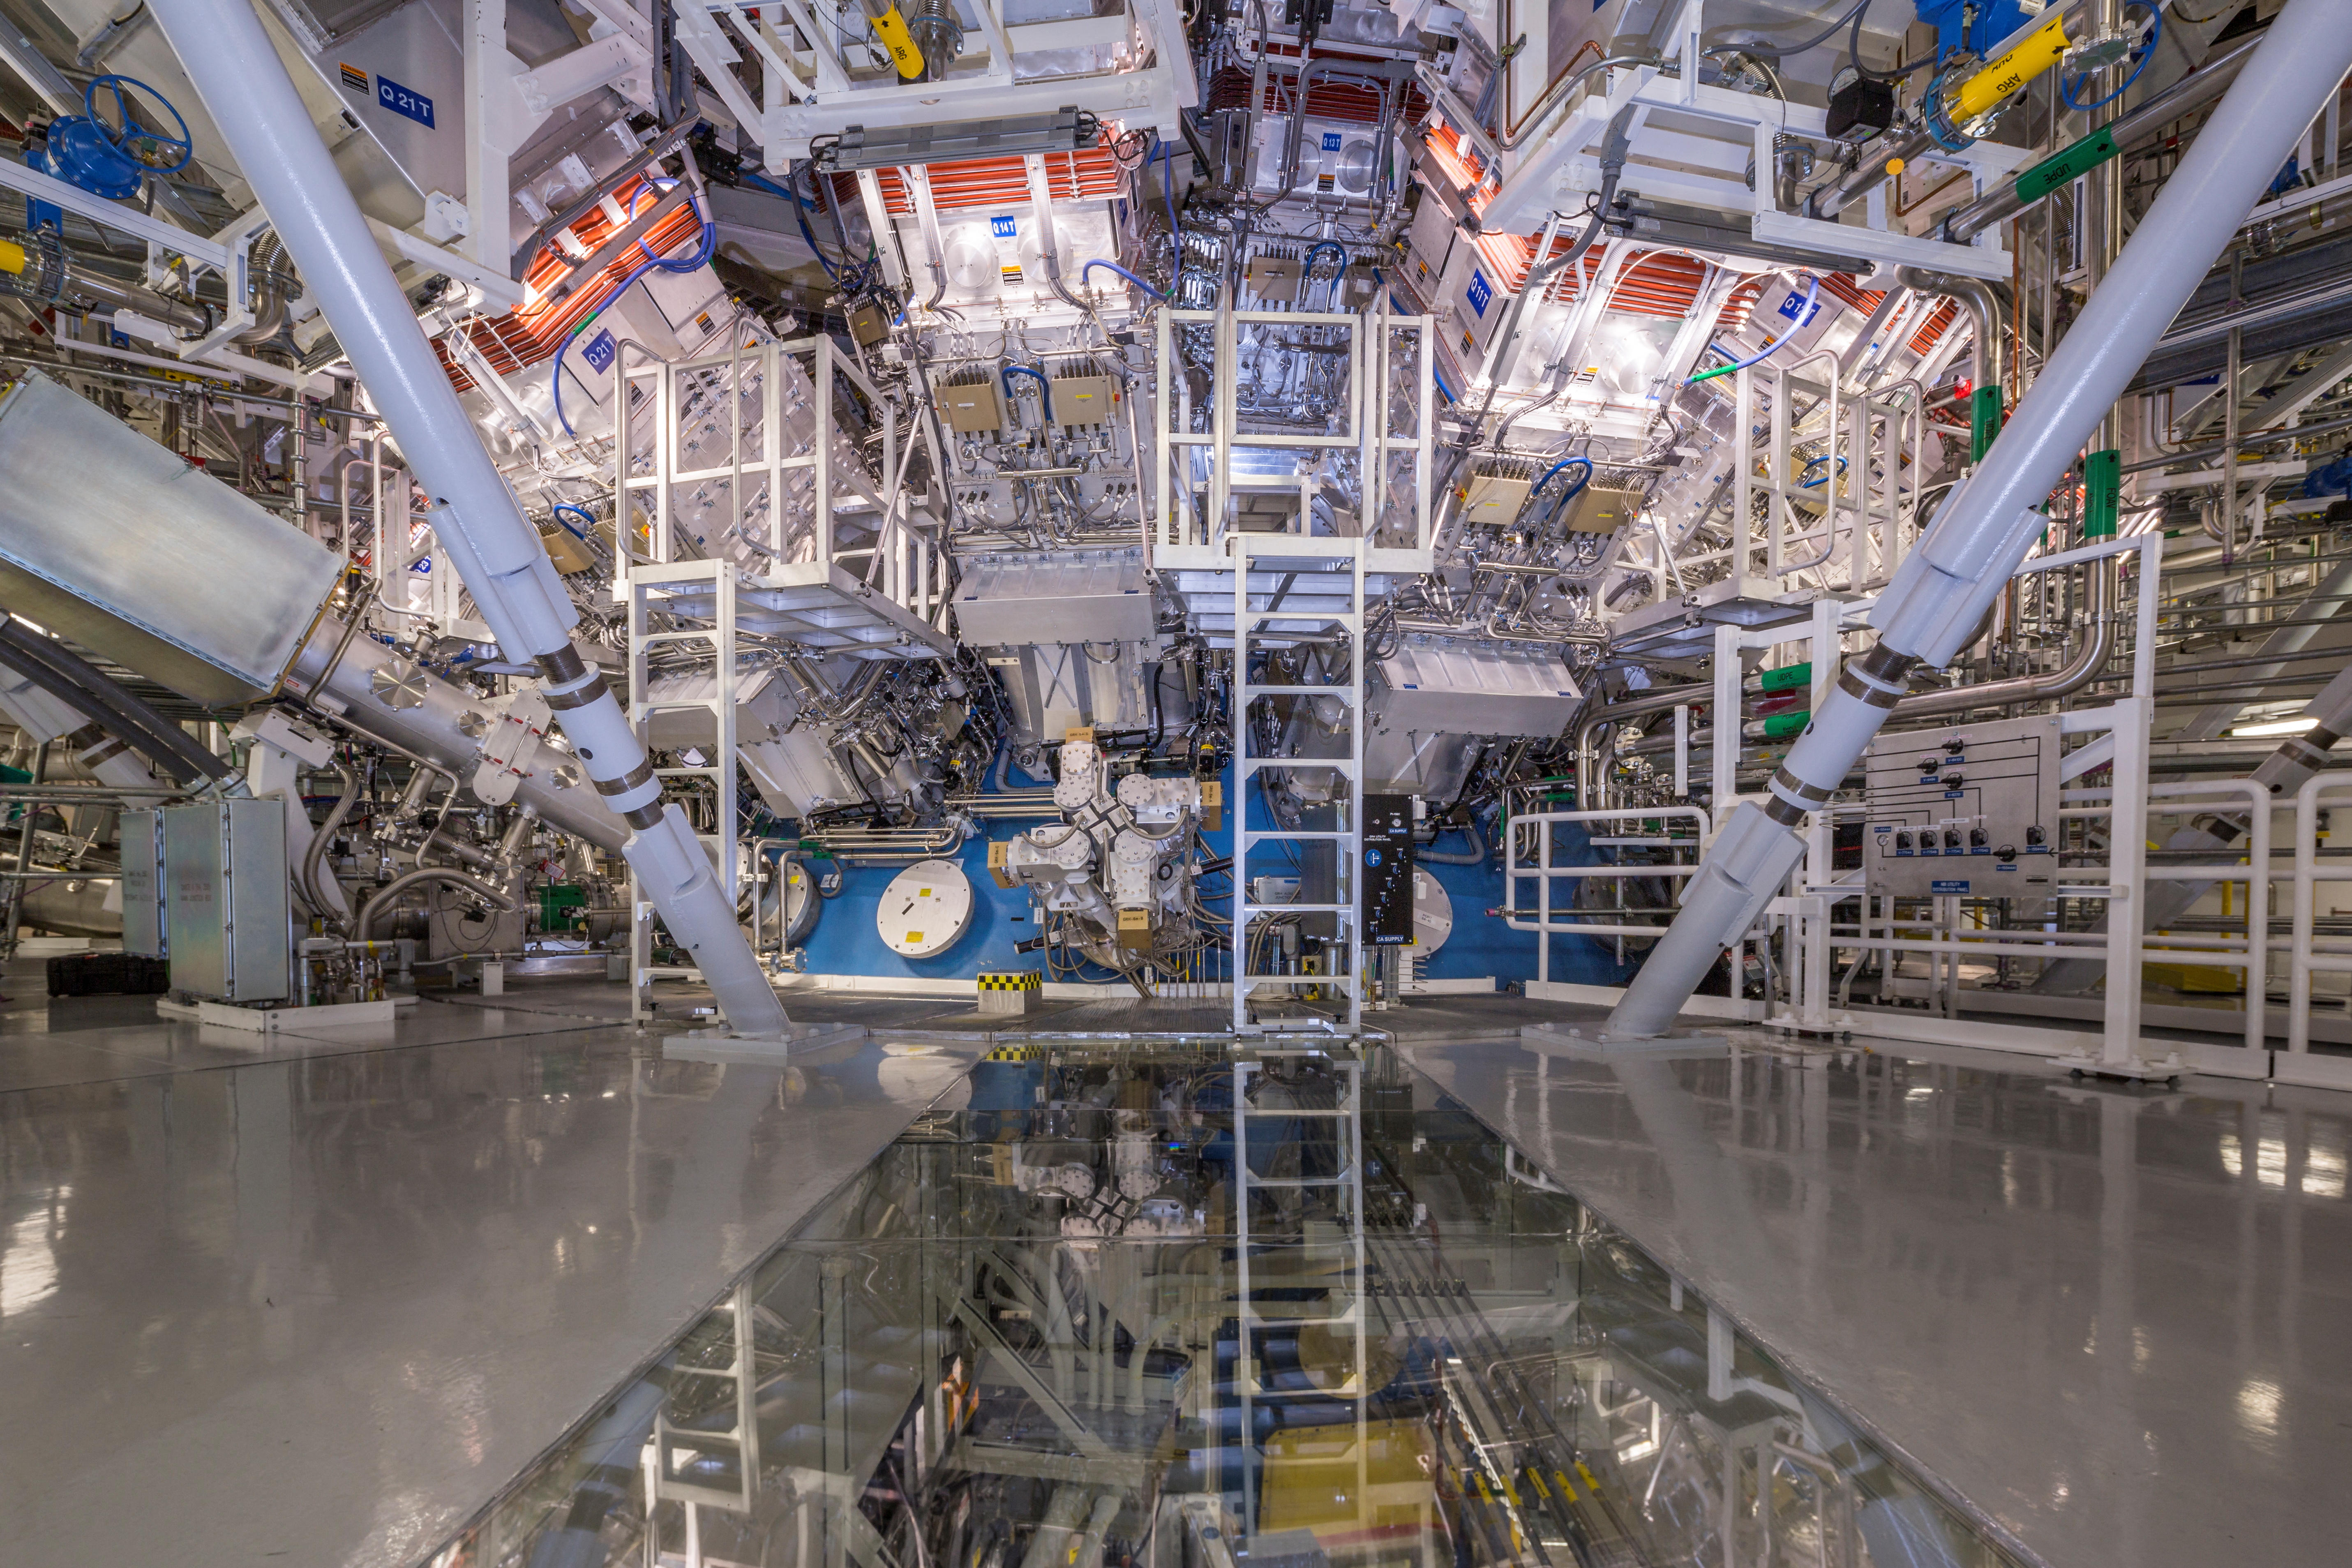 The Target Chamber of the National Ignition Facility is seen at the Lawrence Livermore National Laboratory in Livermore, California, U.S., in an undated handout image. A service system lift allows technicians to access the Target Chamber's interior for inspection and maintenance. Lawrence Livermore National Laboratory/Handout via REUTERS 